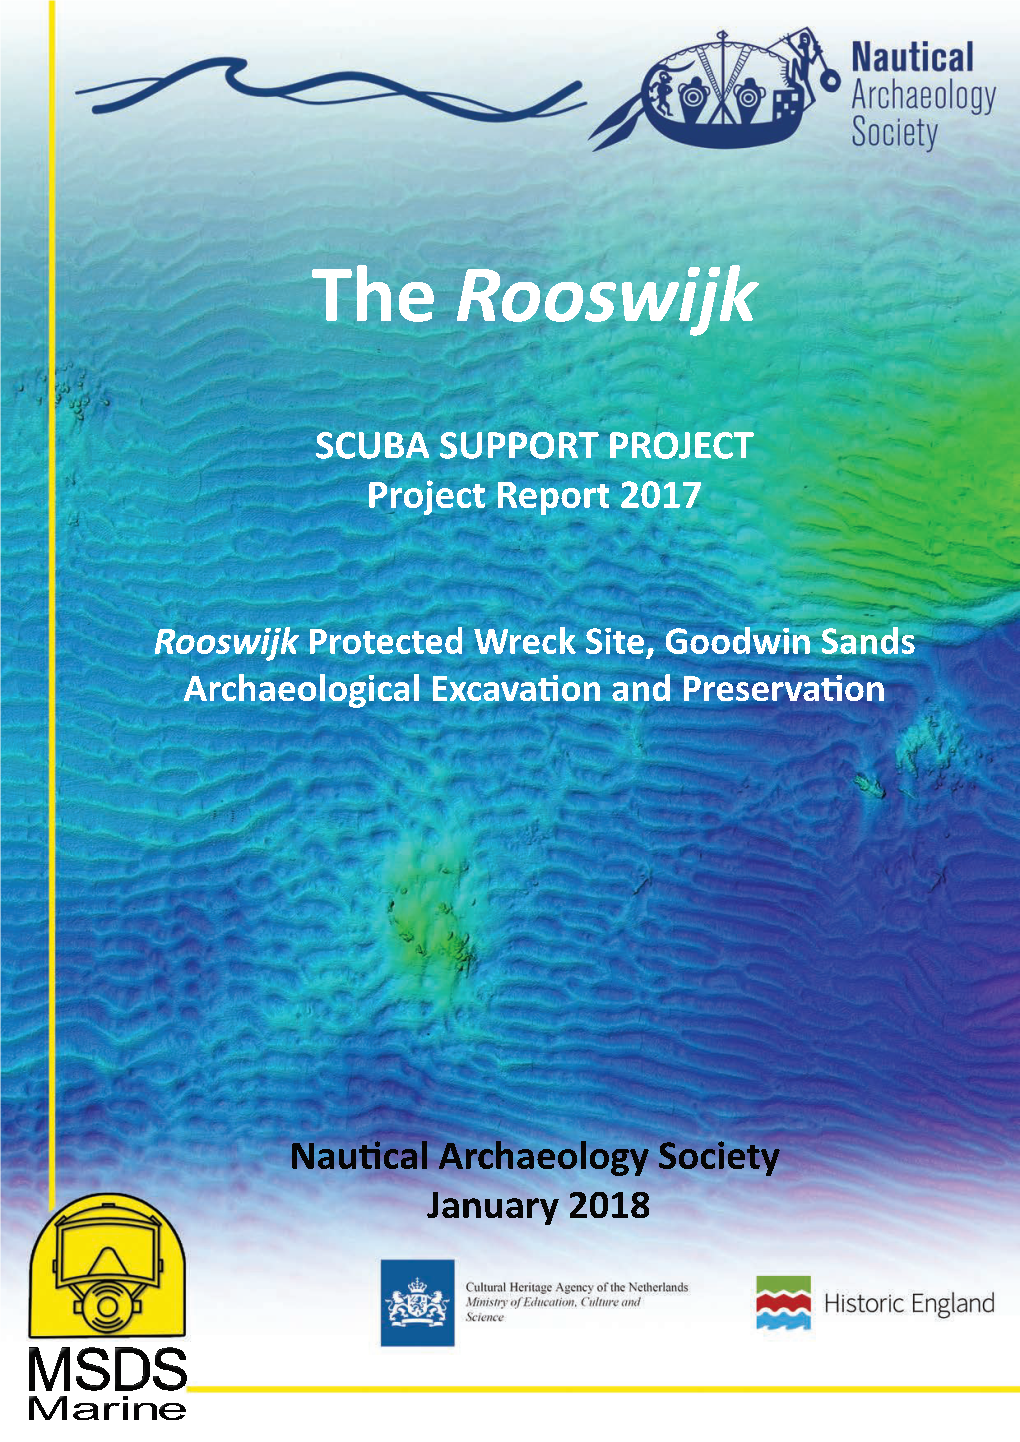 Rooswijk Protected Wreck Site Goodwin Sands Archaeological